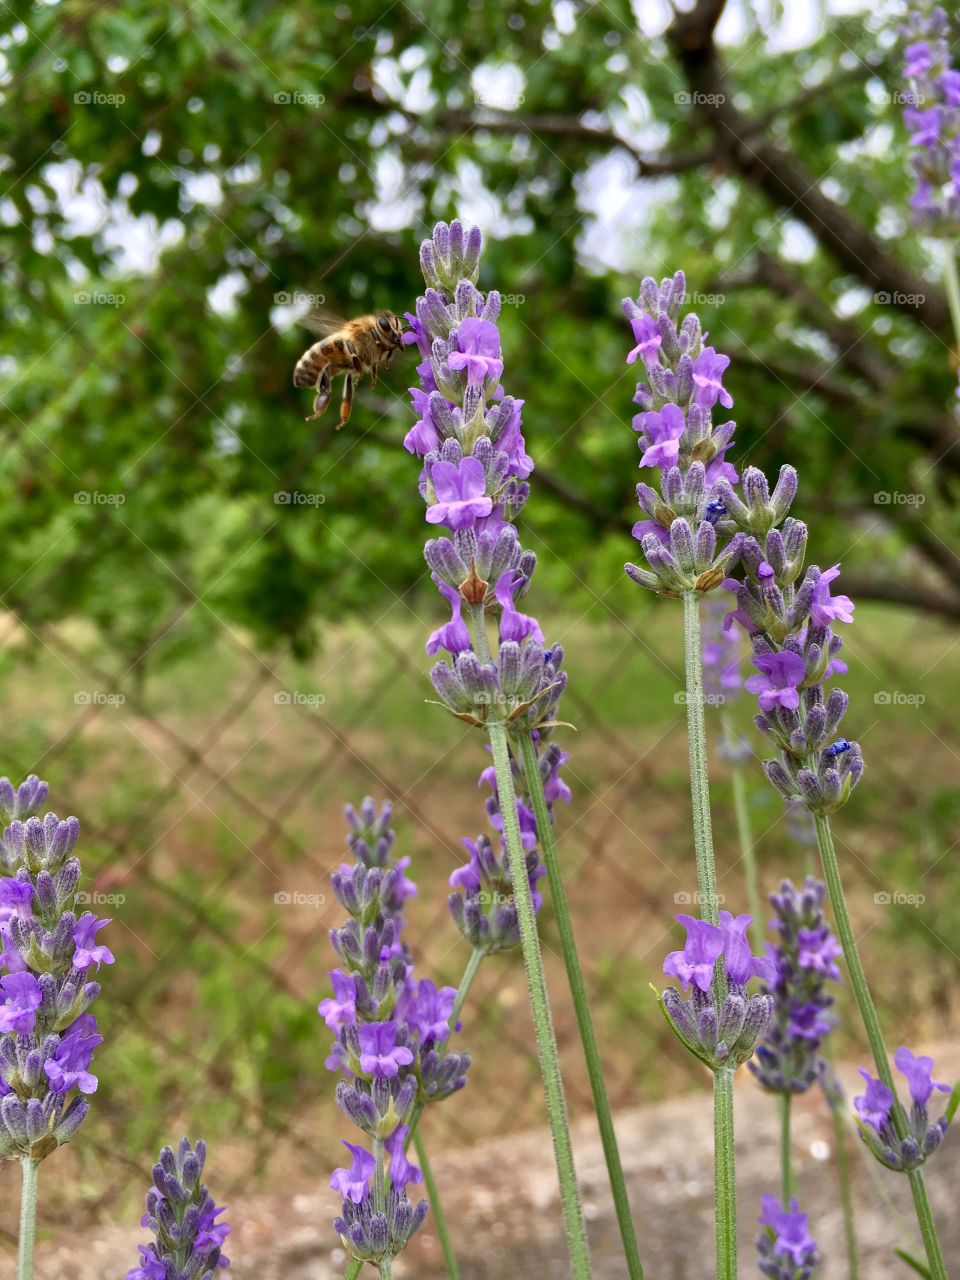 Flowering lavender in the garden and a flying bee